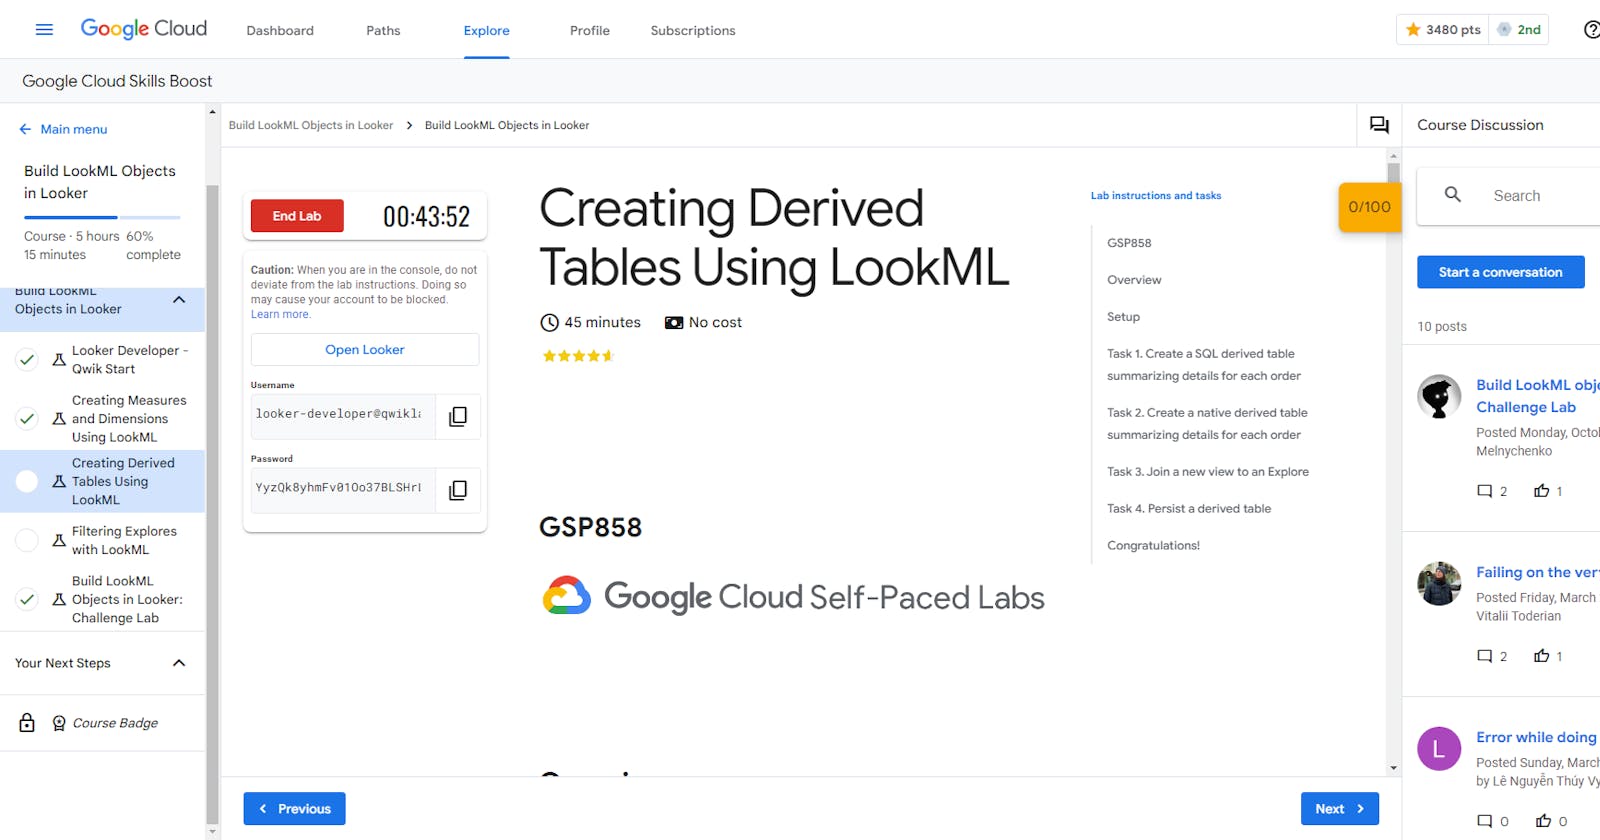 Creating Derived Tables Using LookML - GSP858